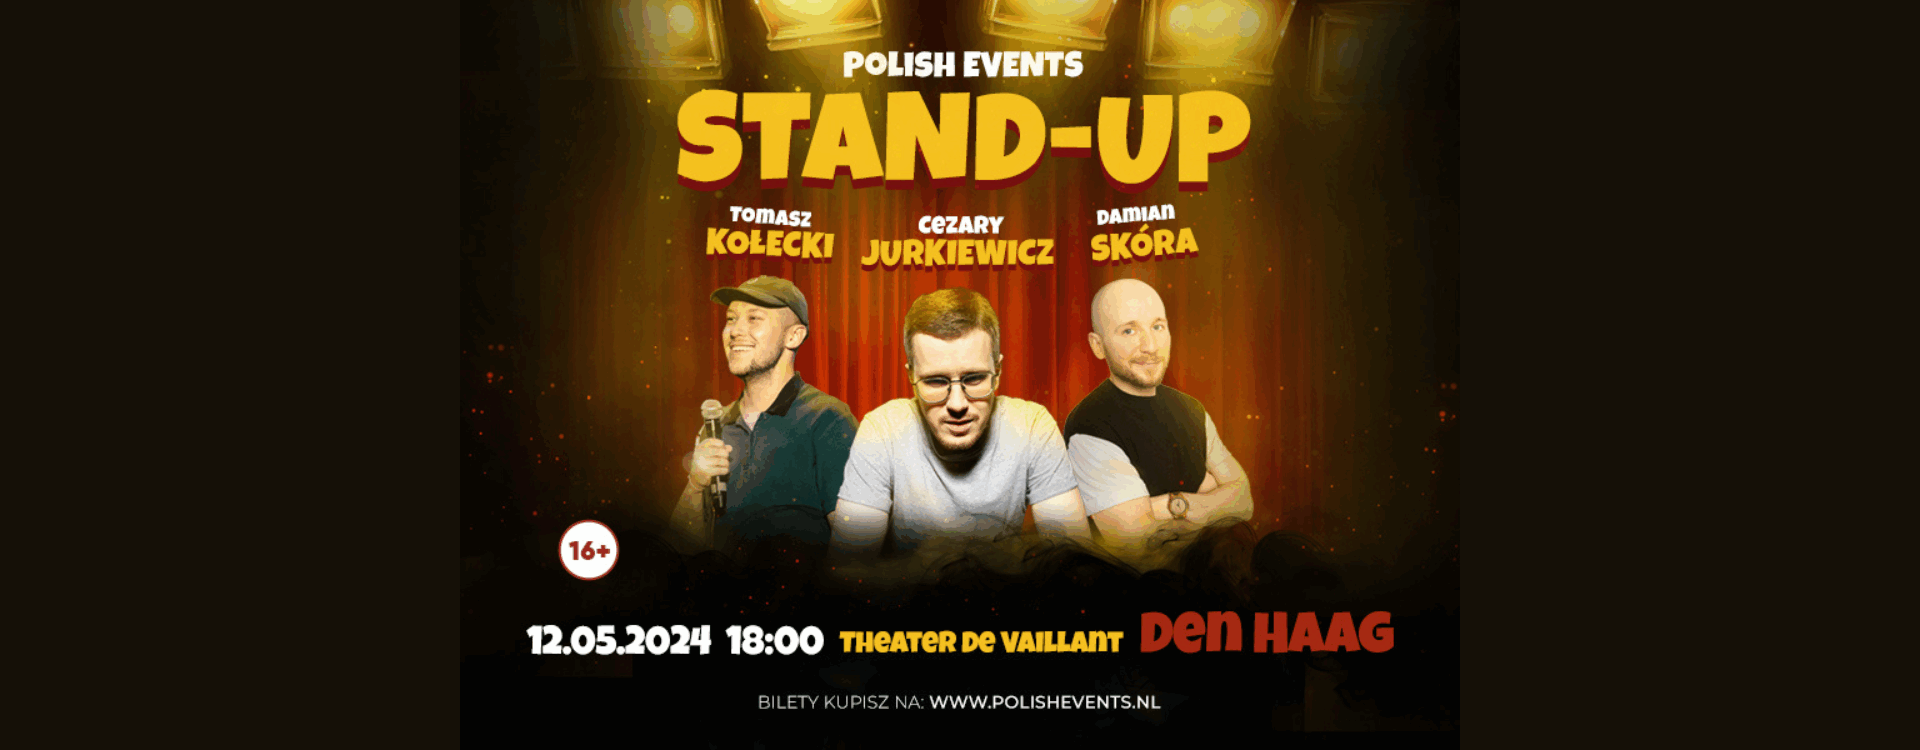 Stand-up